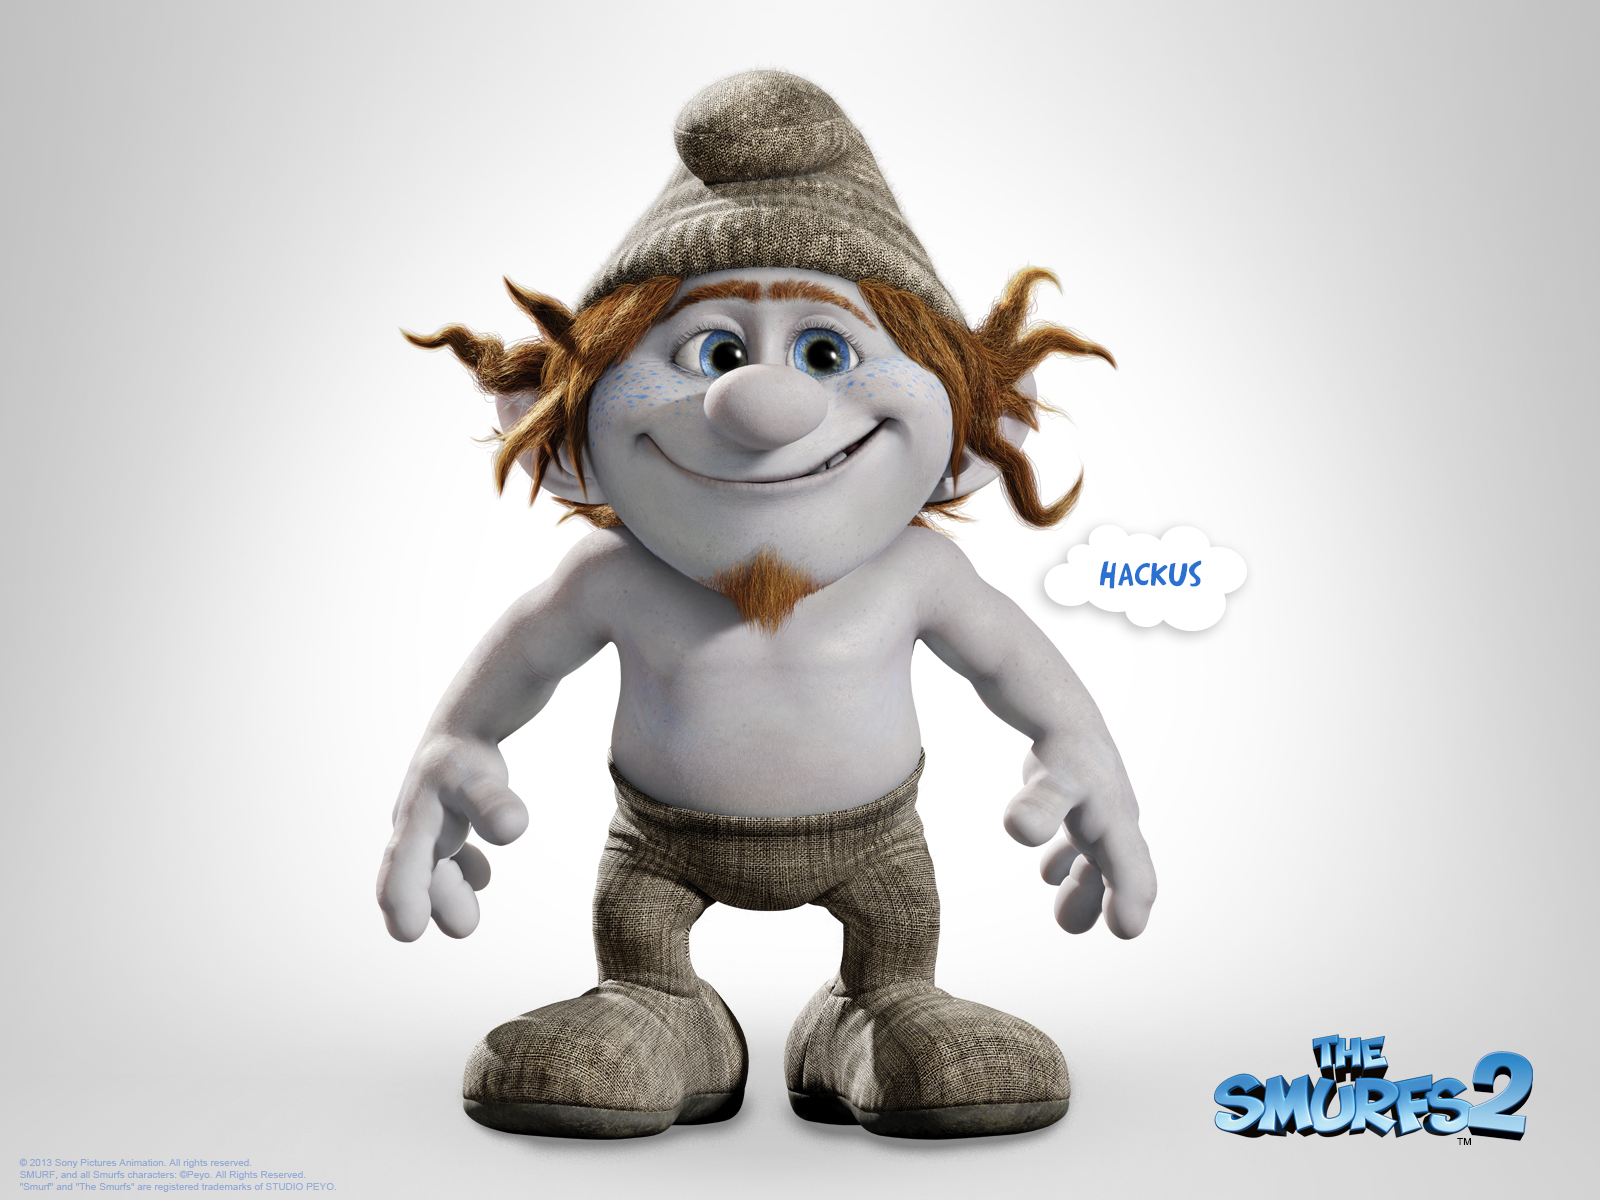 Movie The Smurfs 2 HD Wallpaper | Background Image